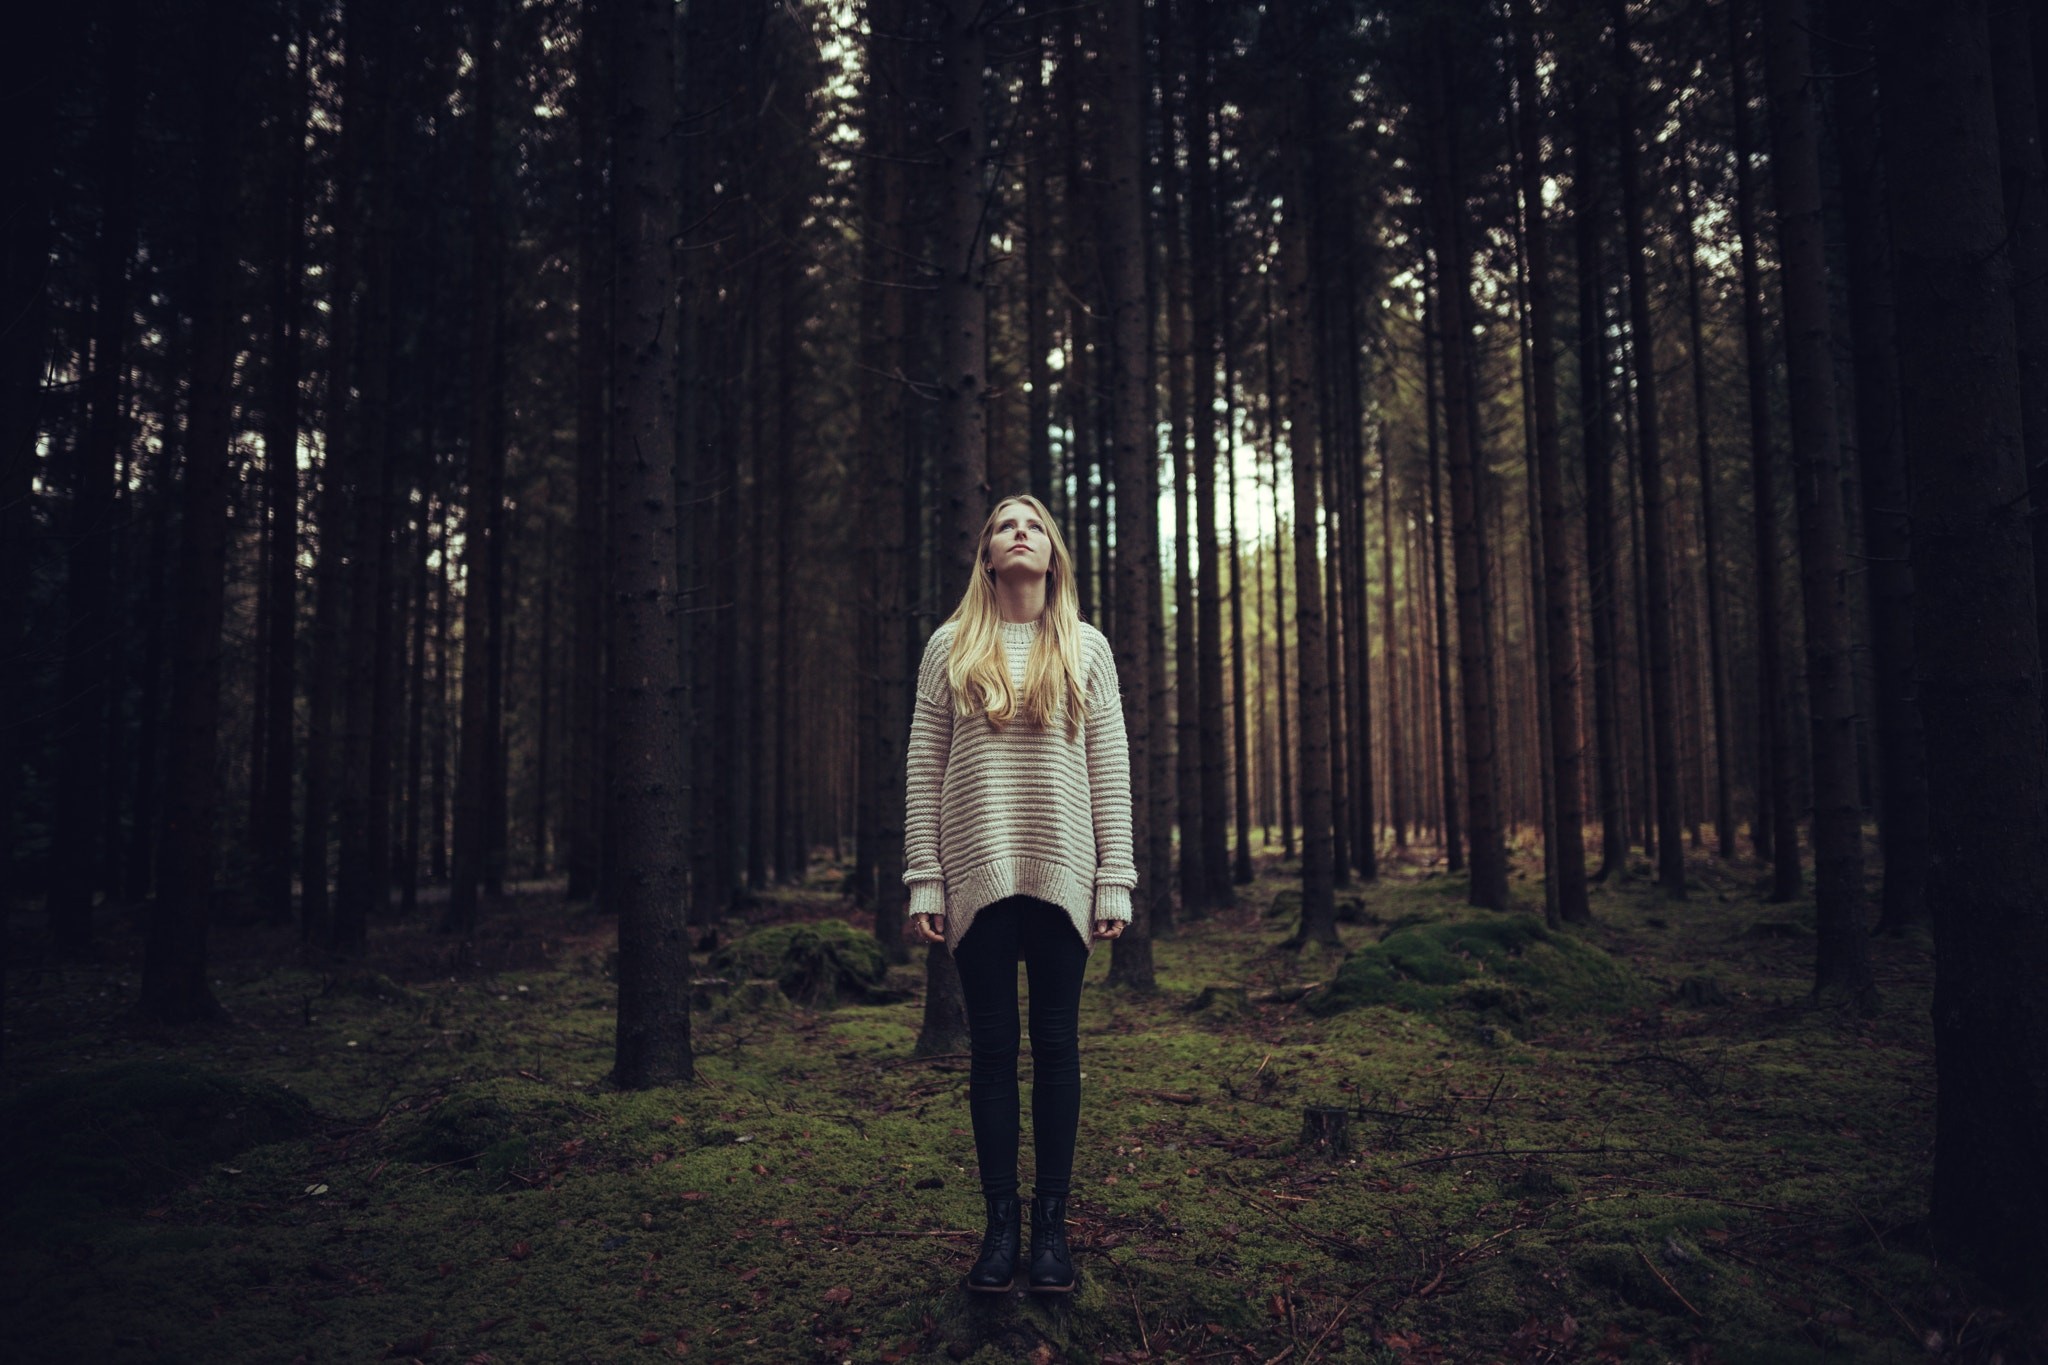 Forest Trees Nature Women Outdoors 500px Women Model DAVALi Photography 2048x1365